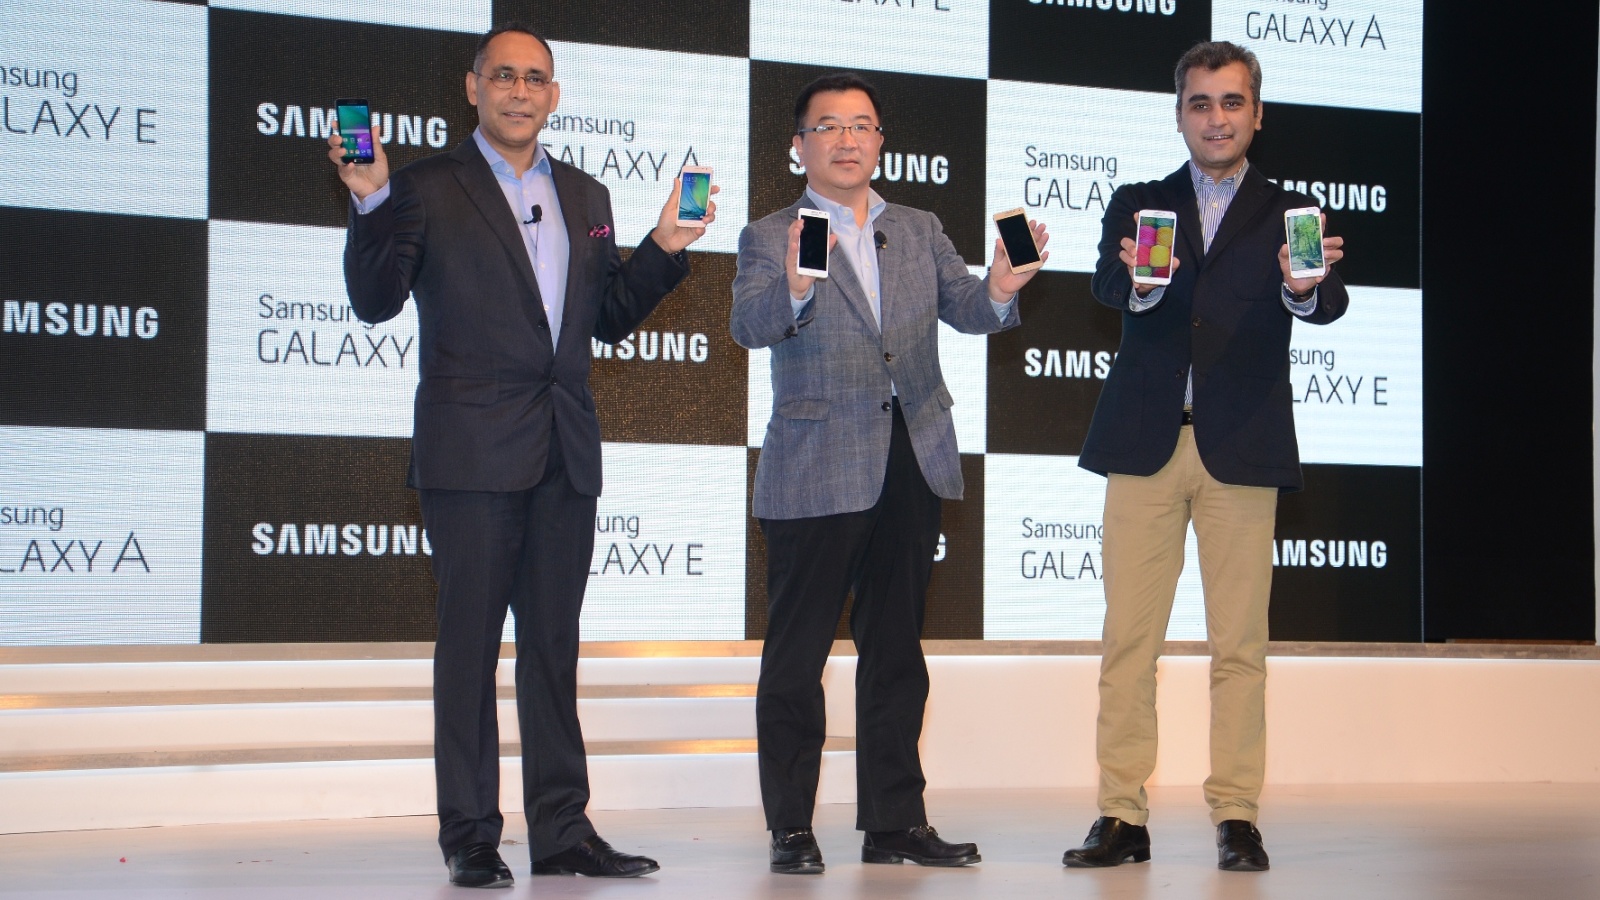 Samsung Announces The Galaxy A6 - Maybe?